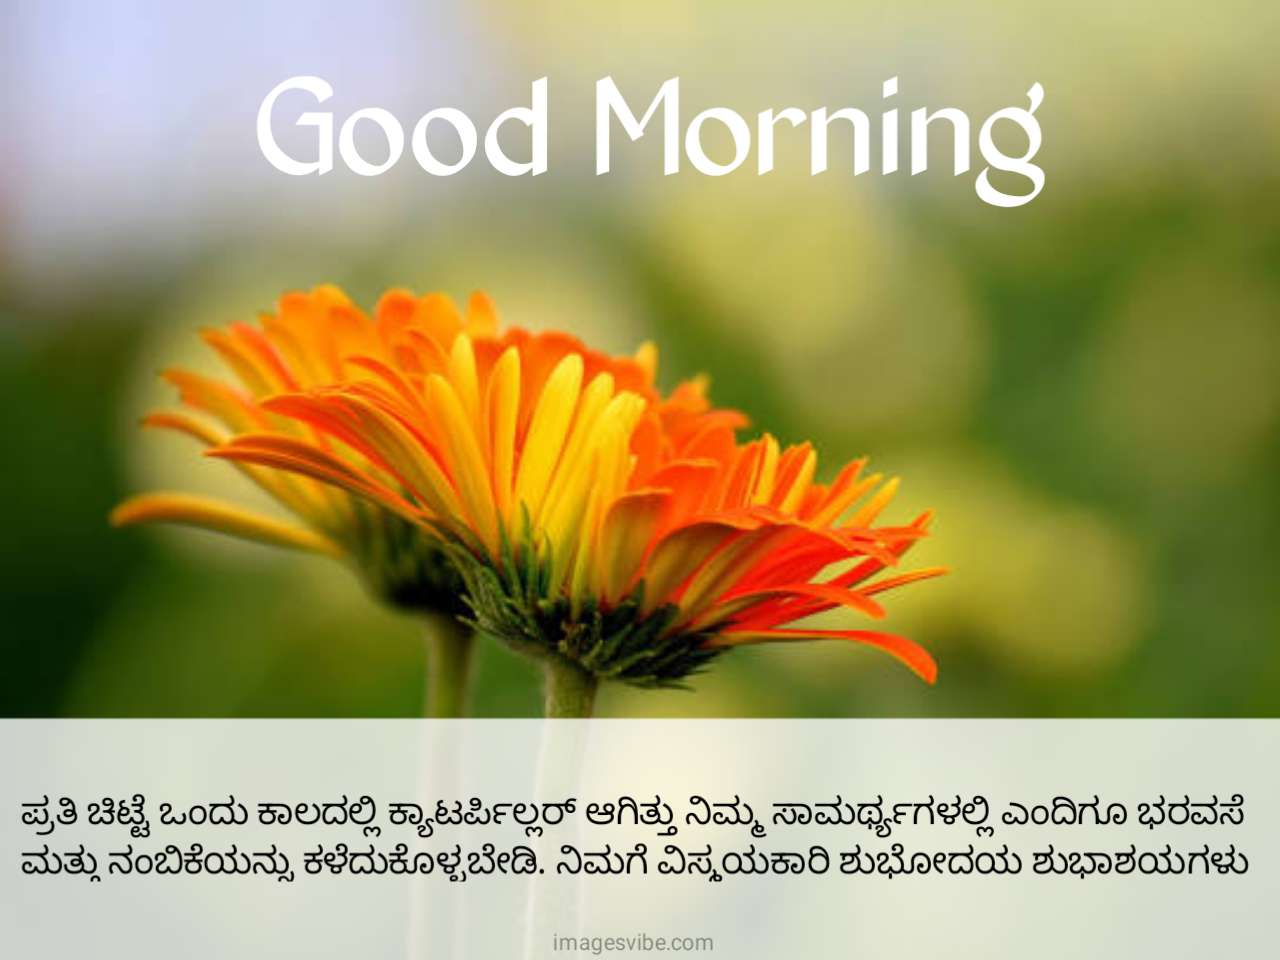 Beautiful Good Morning Kannada Images & Quotes in 2023 - Images Vibe